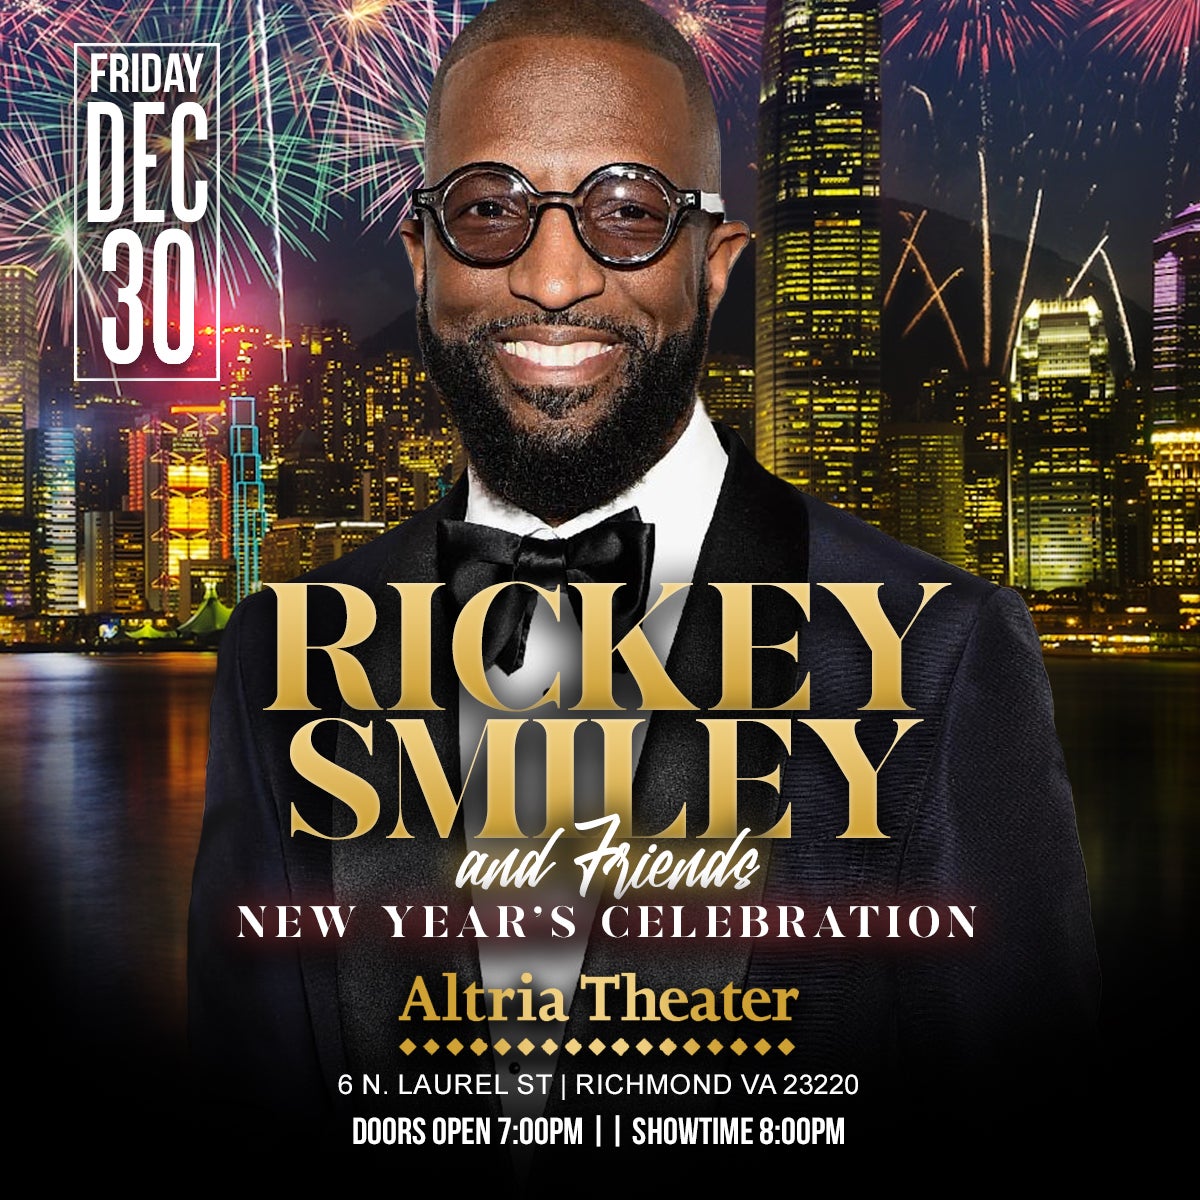 More Info for RICKEY SMILEY PERFORMS IN NEW YEARS CELEBRATION